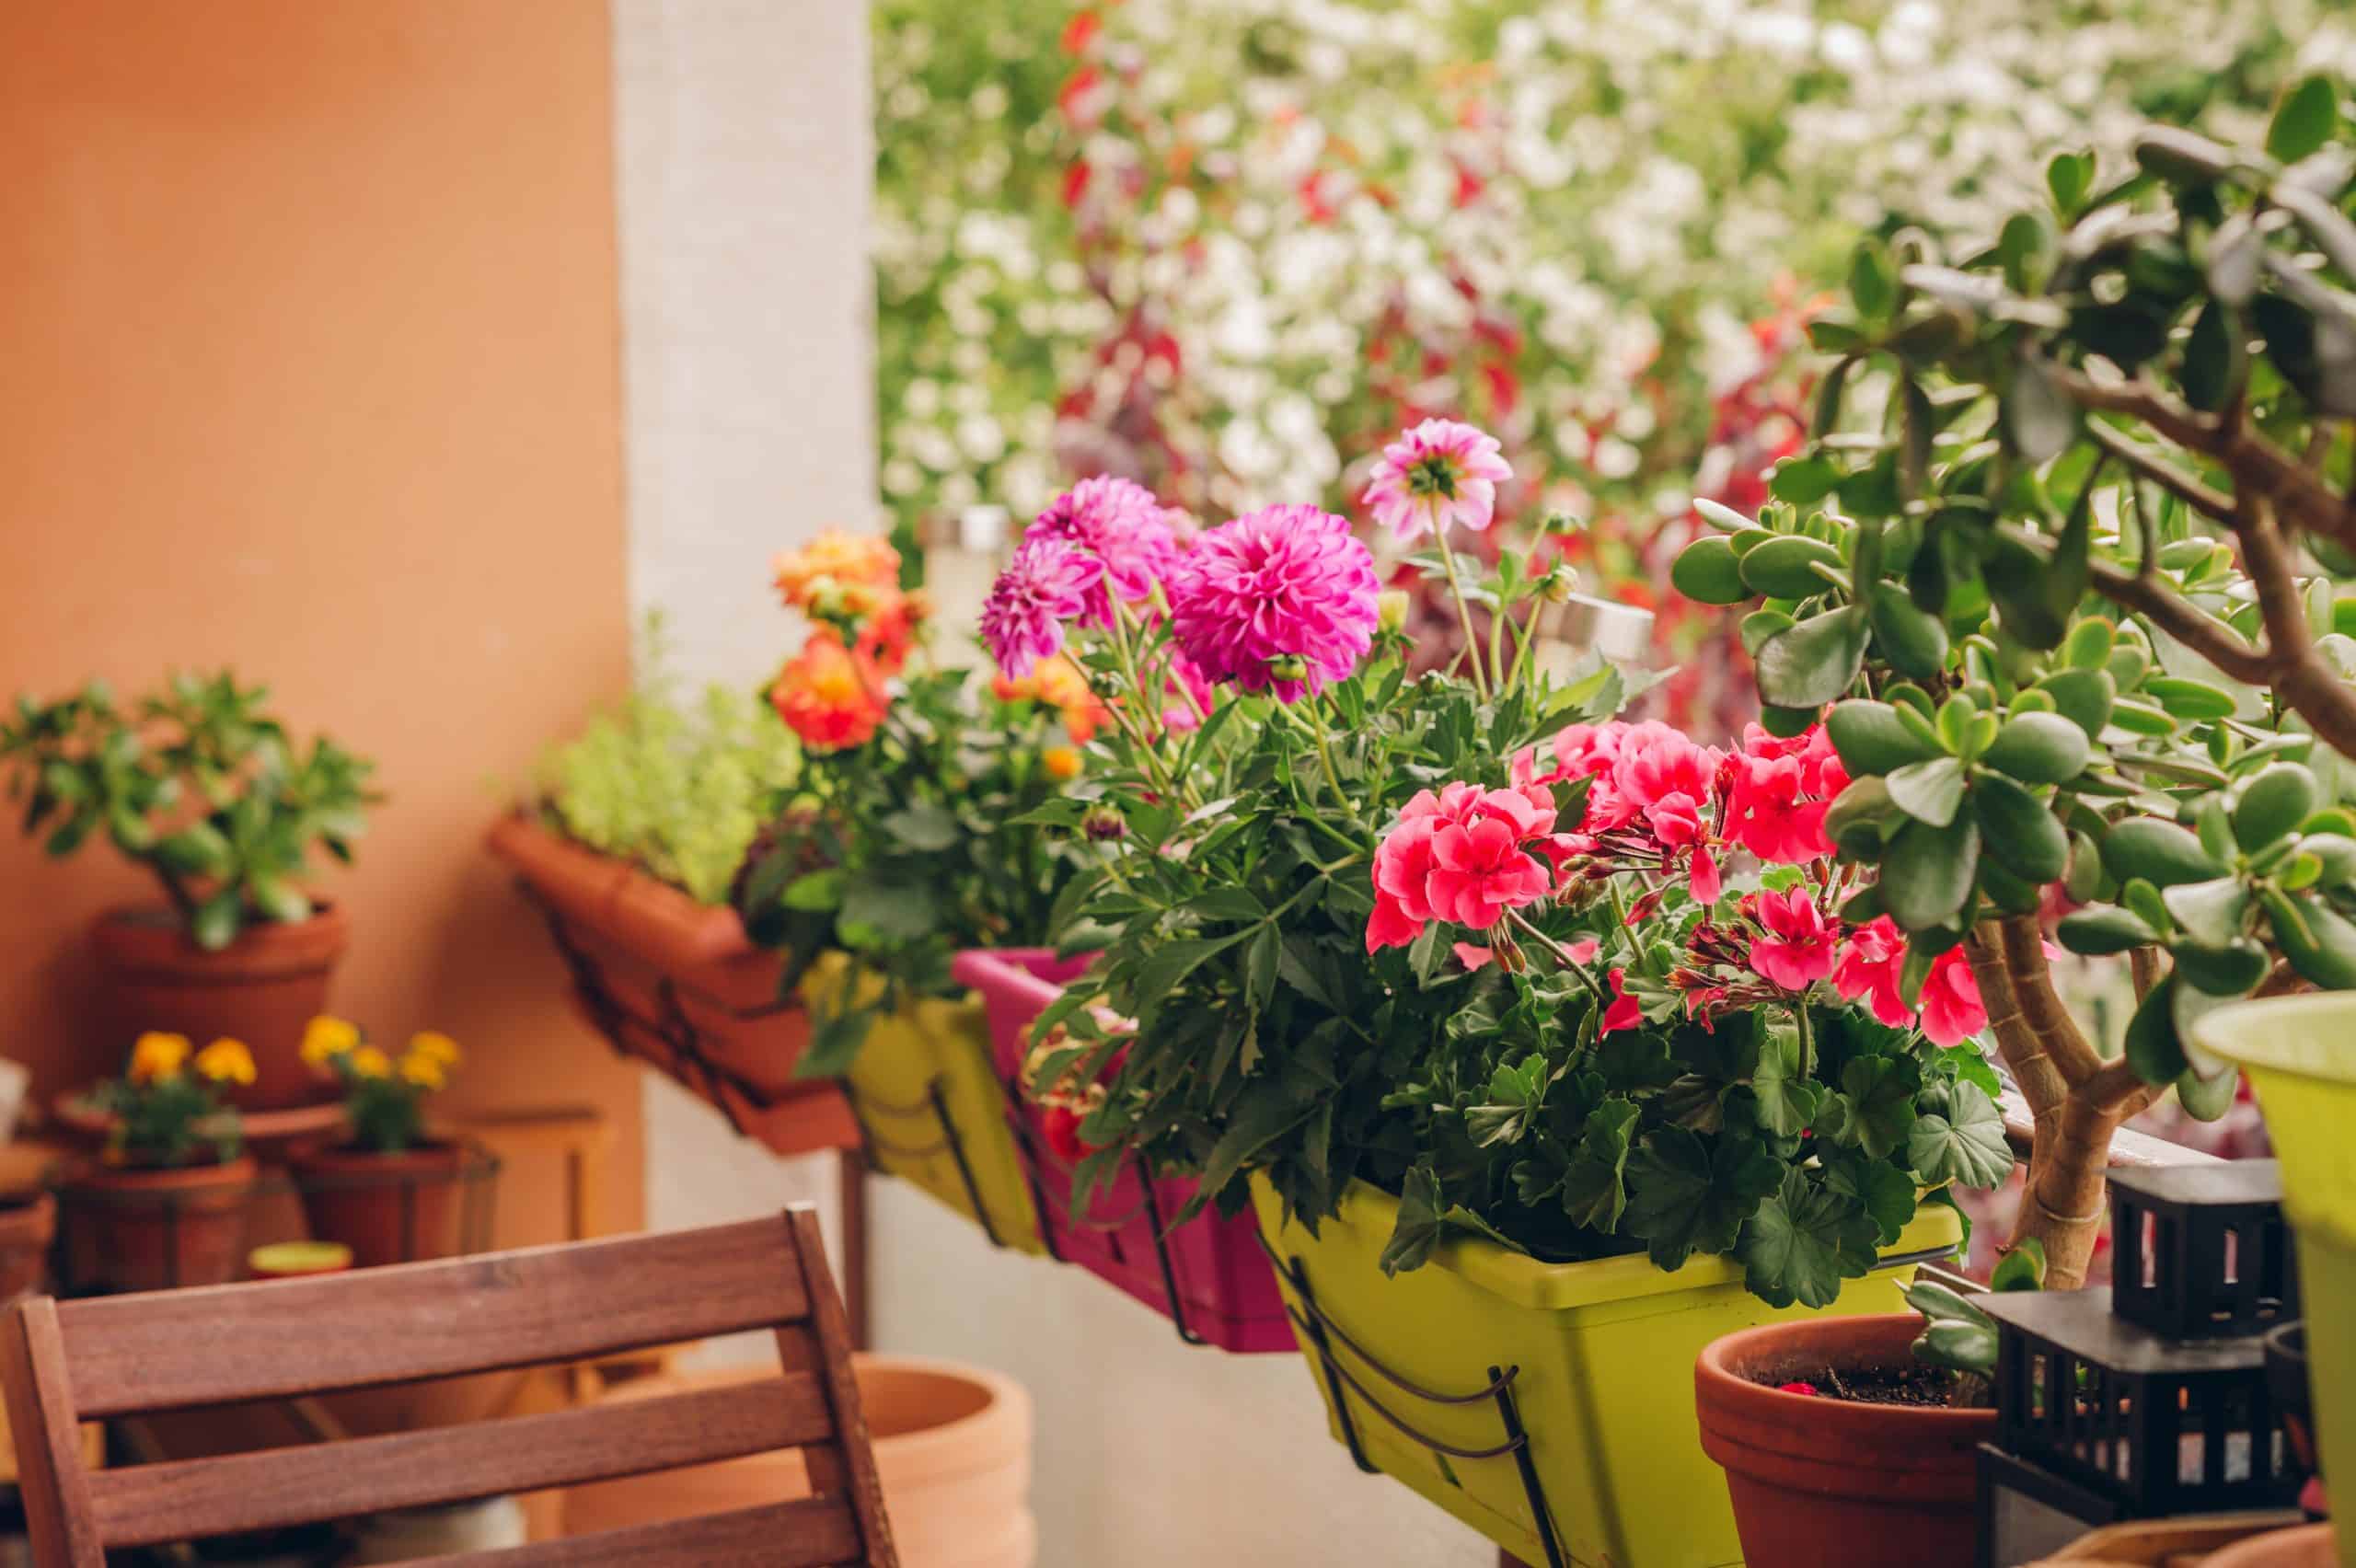 Looking for some balcony design inspiration? Here are the most beautiful balcony flowers